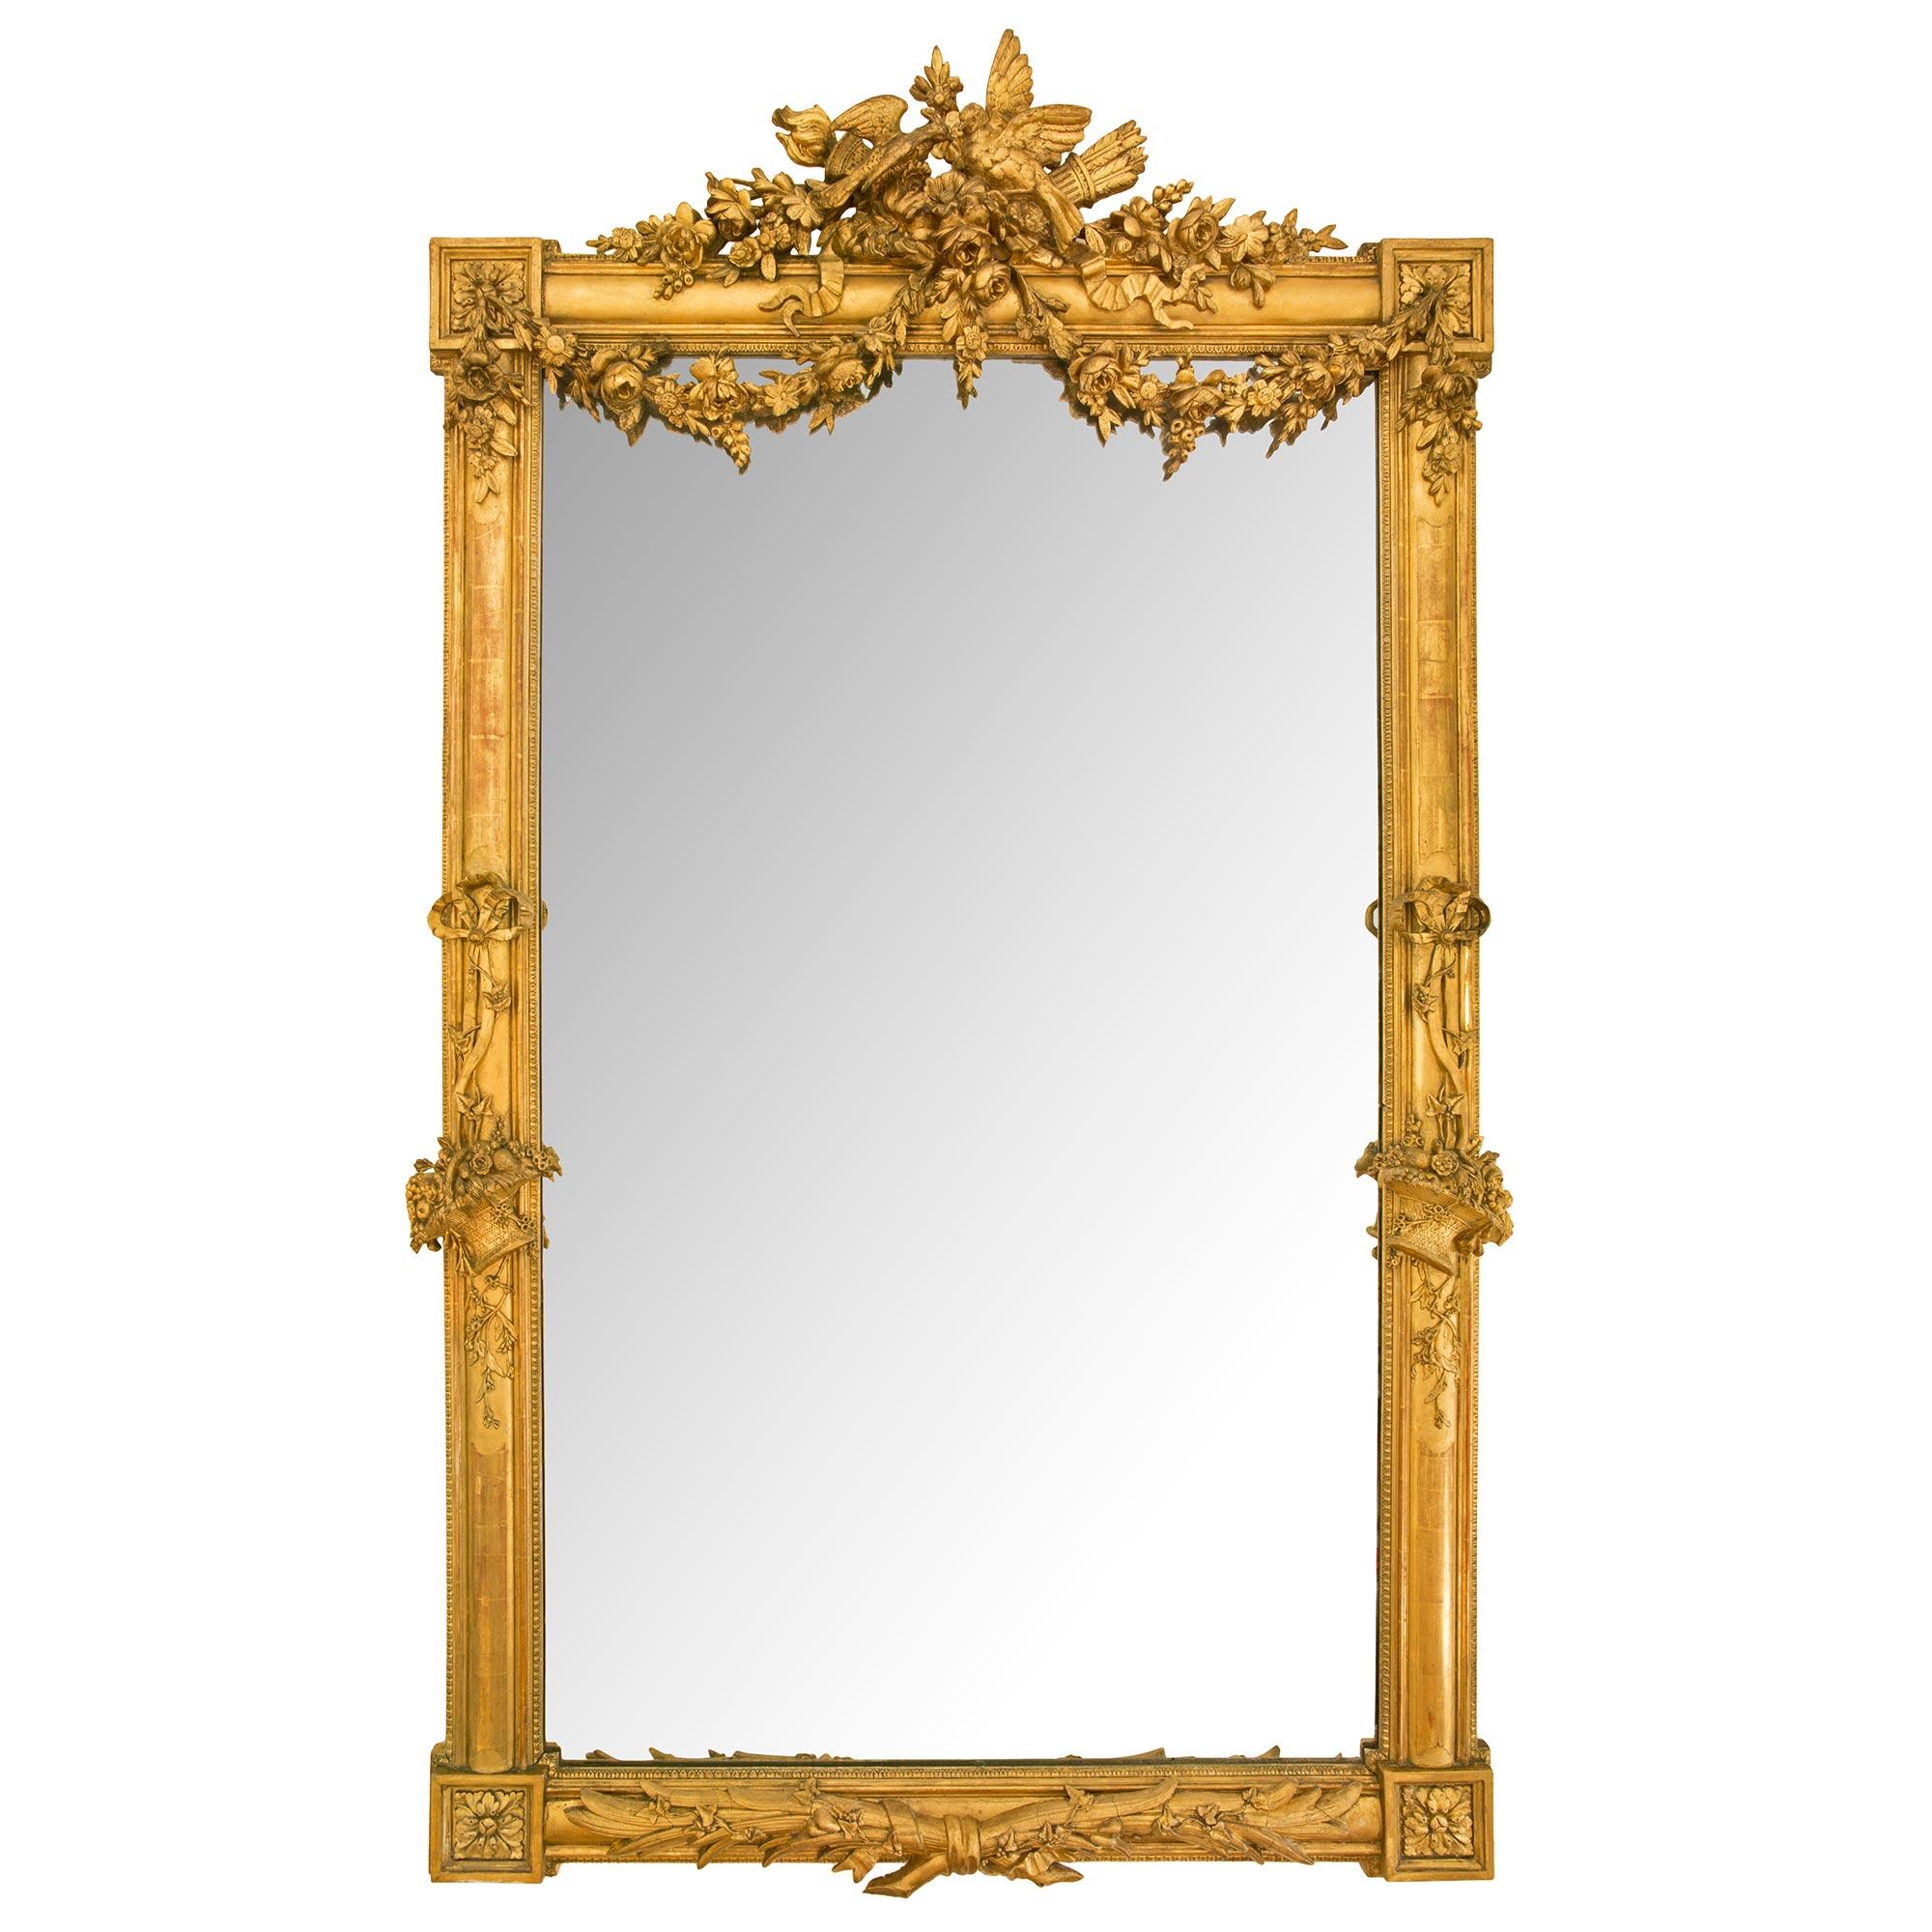 A most elegant French 19th century Louis XVI st. giltwood mirror. The mirror retains its original mirror plate framed within a fine Coeur de Rai border. The beautiful mottled frame displays richly carved block rosettes at each corner with superb